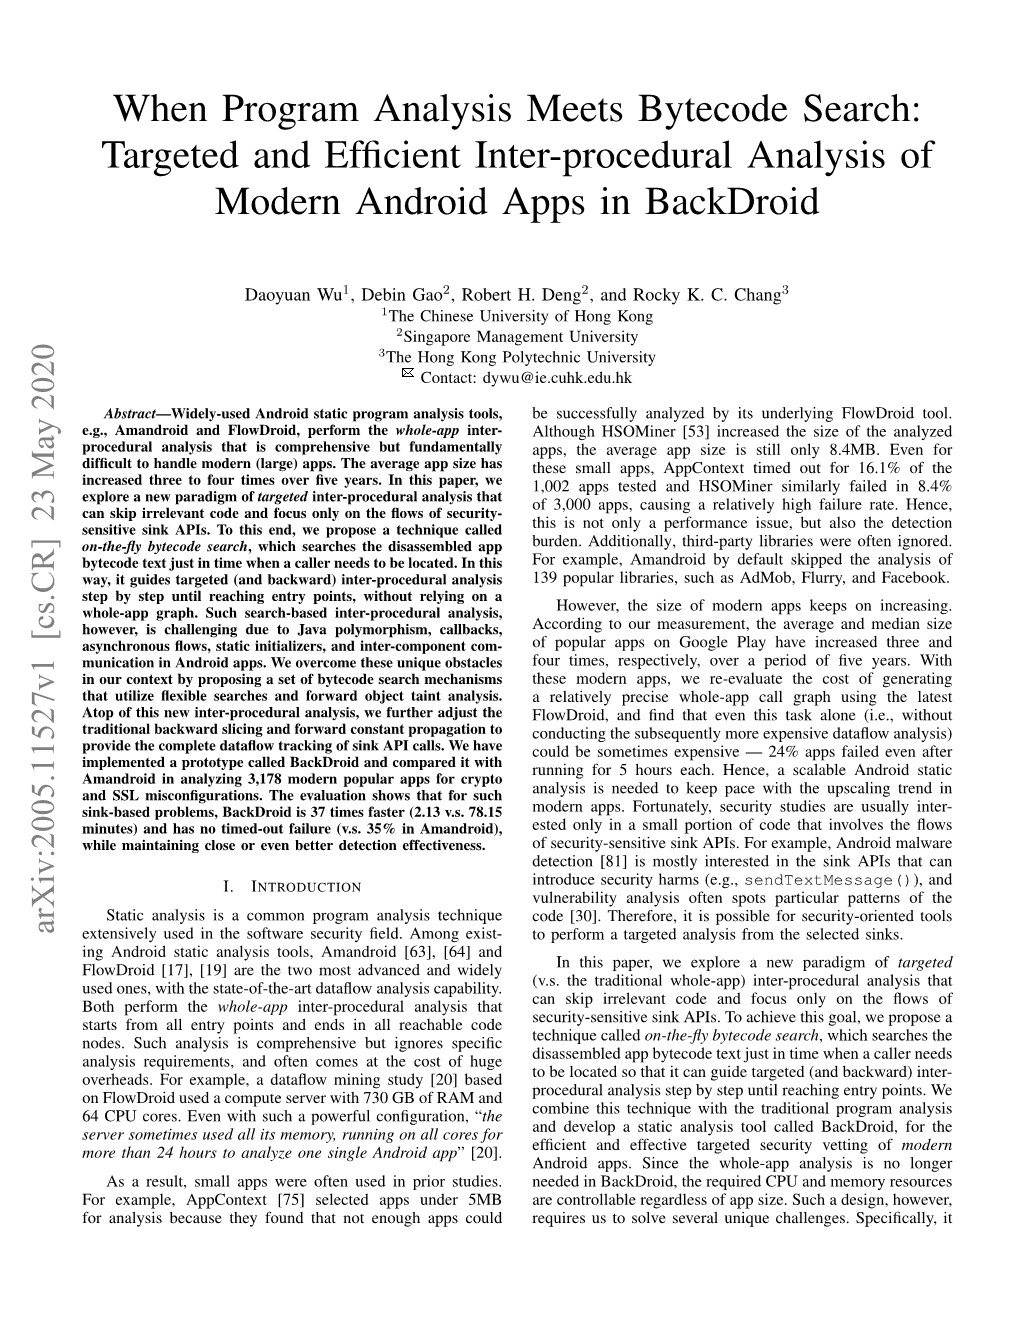 When Program Analysis Meets Bytecode Search: Targeted and Efﬁcient Inter-Procedural Analysis of Modern Android Apps in Backdroid